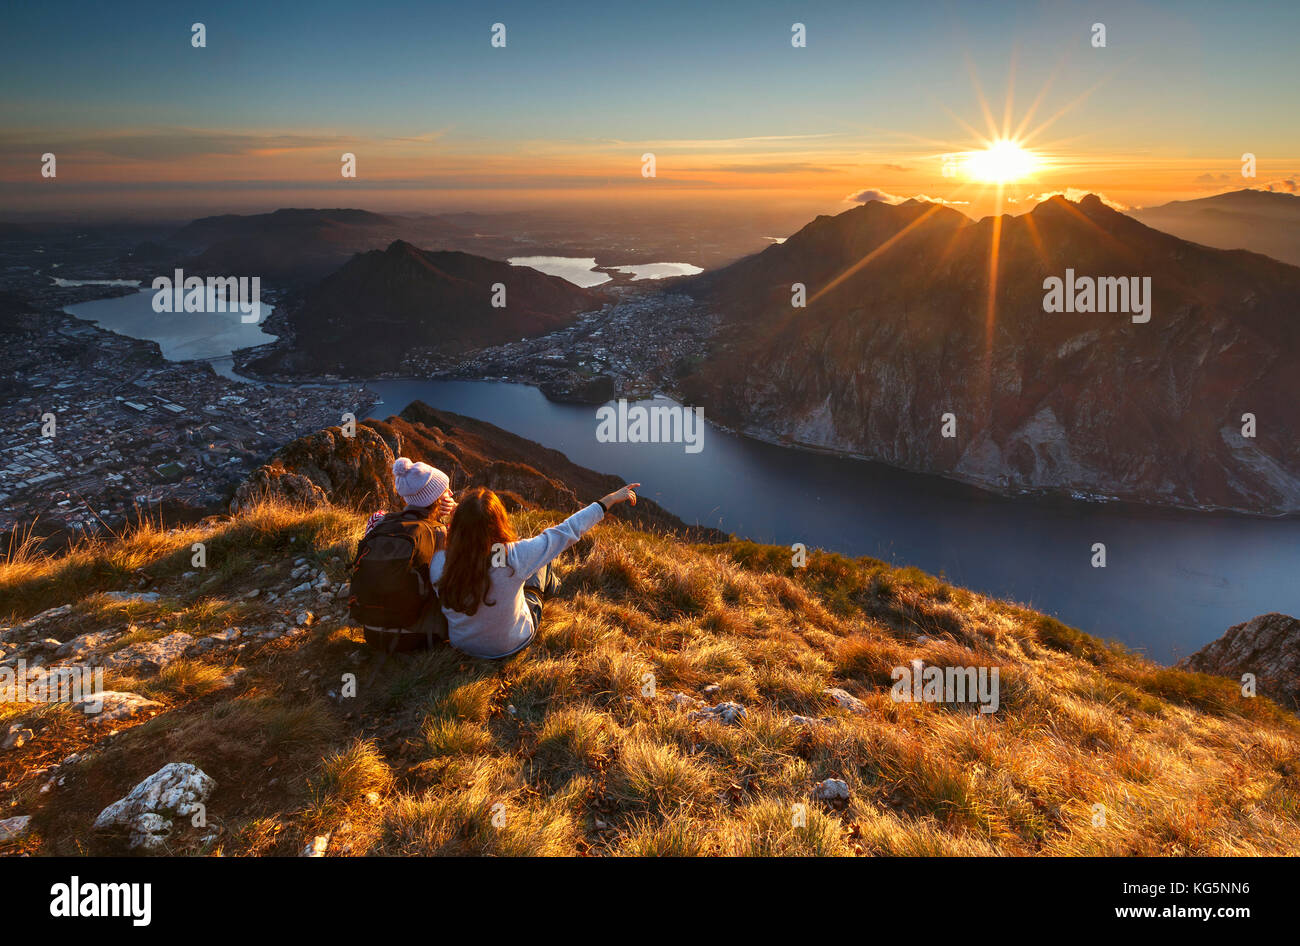 Lake Como, Lombardy, Italy. Two friends watching a scenic sunset from above Lecco city. Stock Photo